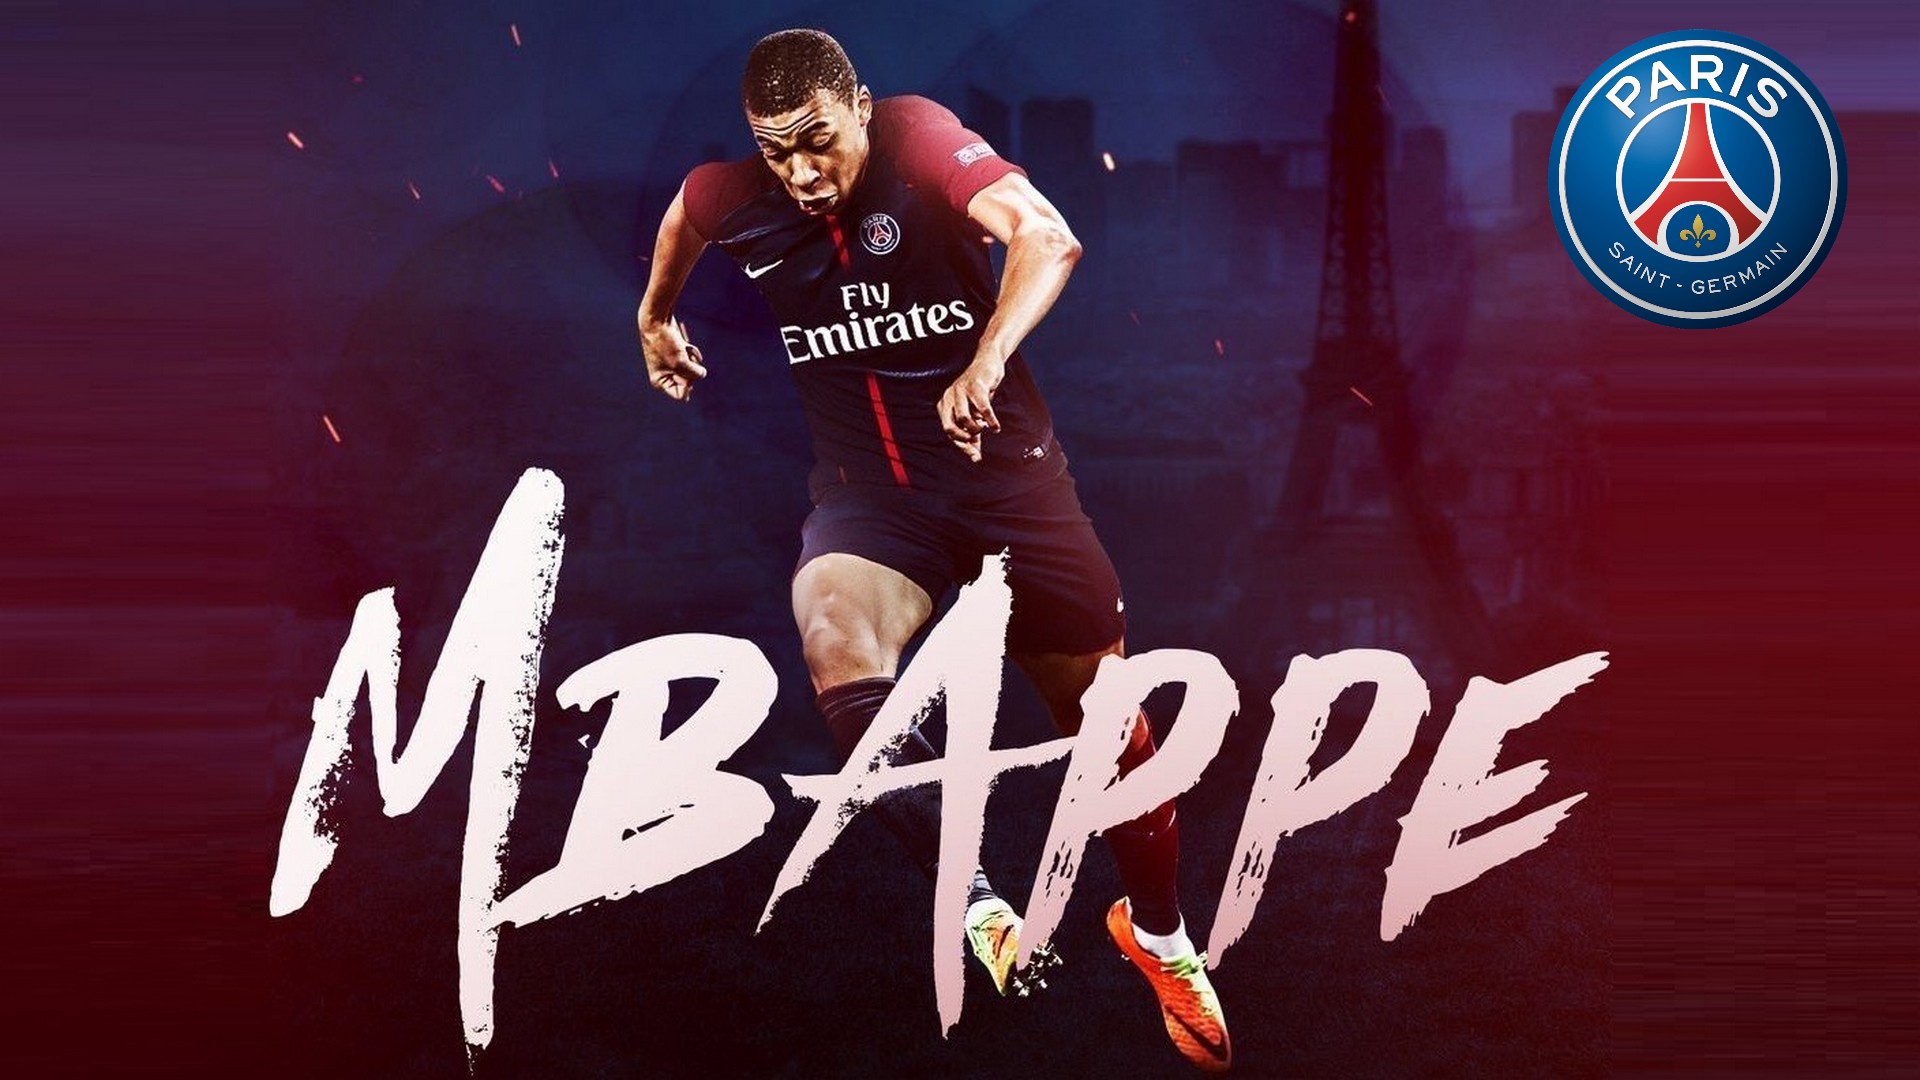 Wallpaper Desktop Mbappe Paris Saint-Germain HD With Resolution 1920X1080 pixel. You can make this wallpaper for your Mac or Windows Desktop Background, iPhone, Android or Tablet and another Smartphone device for free